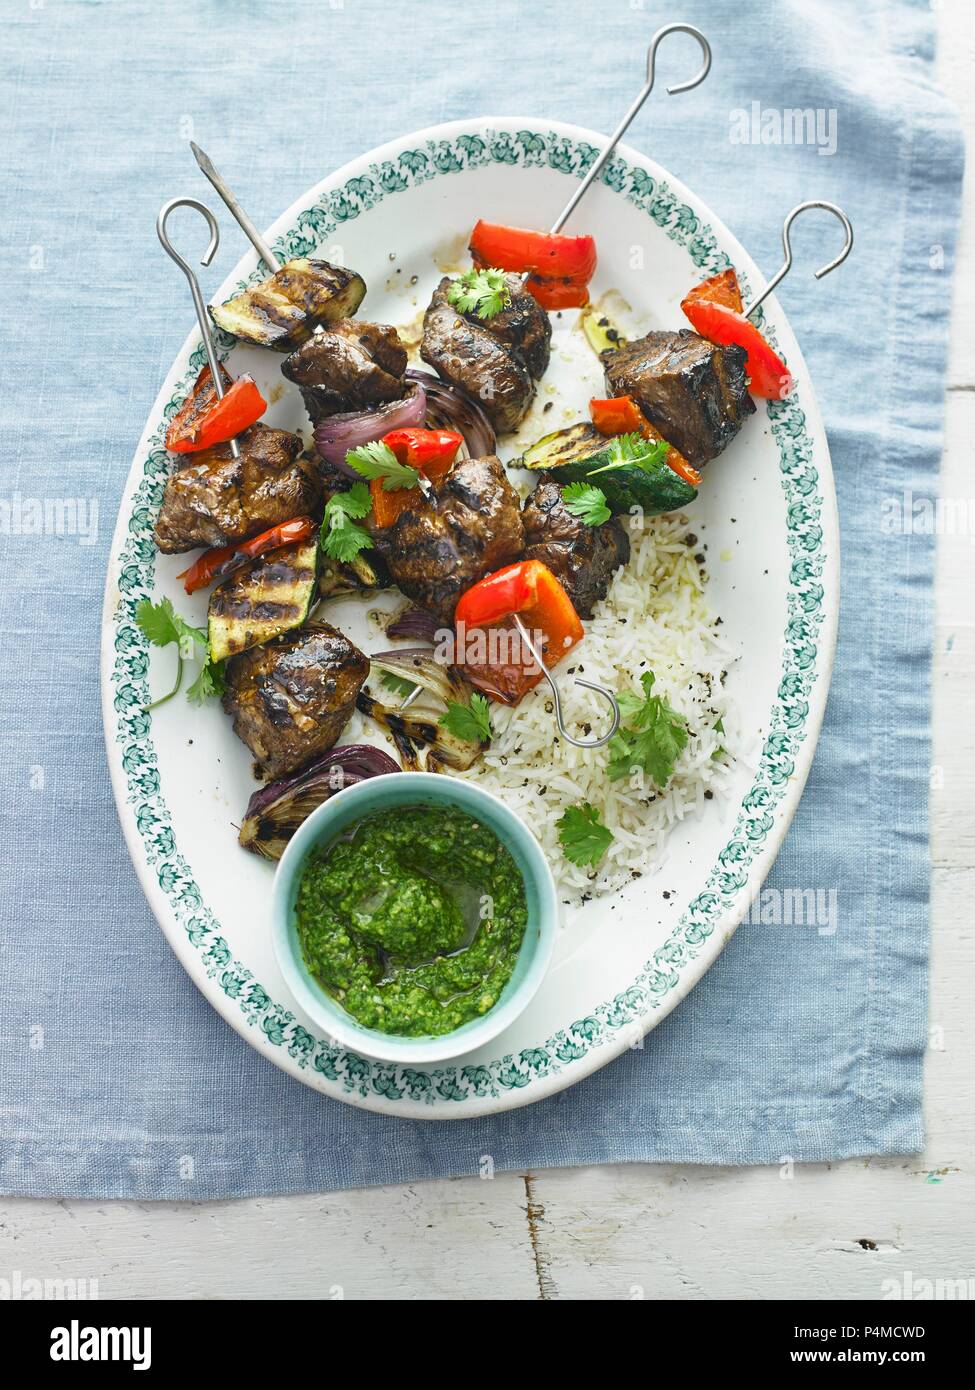 Grilled Lamb Skewers with Pesto Stock Photo